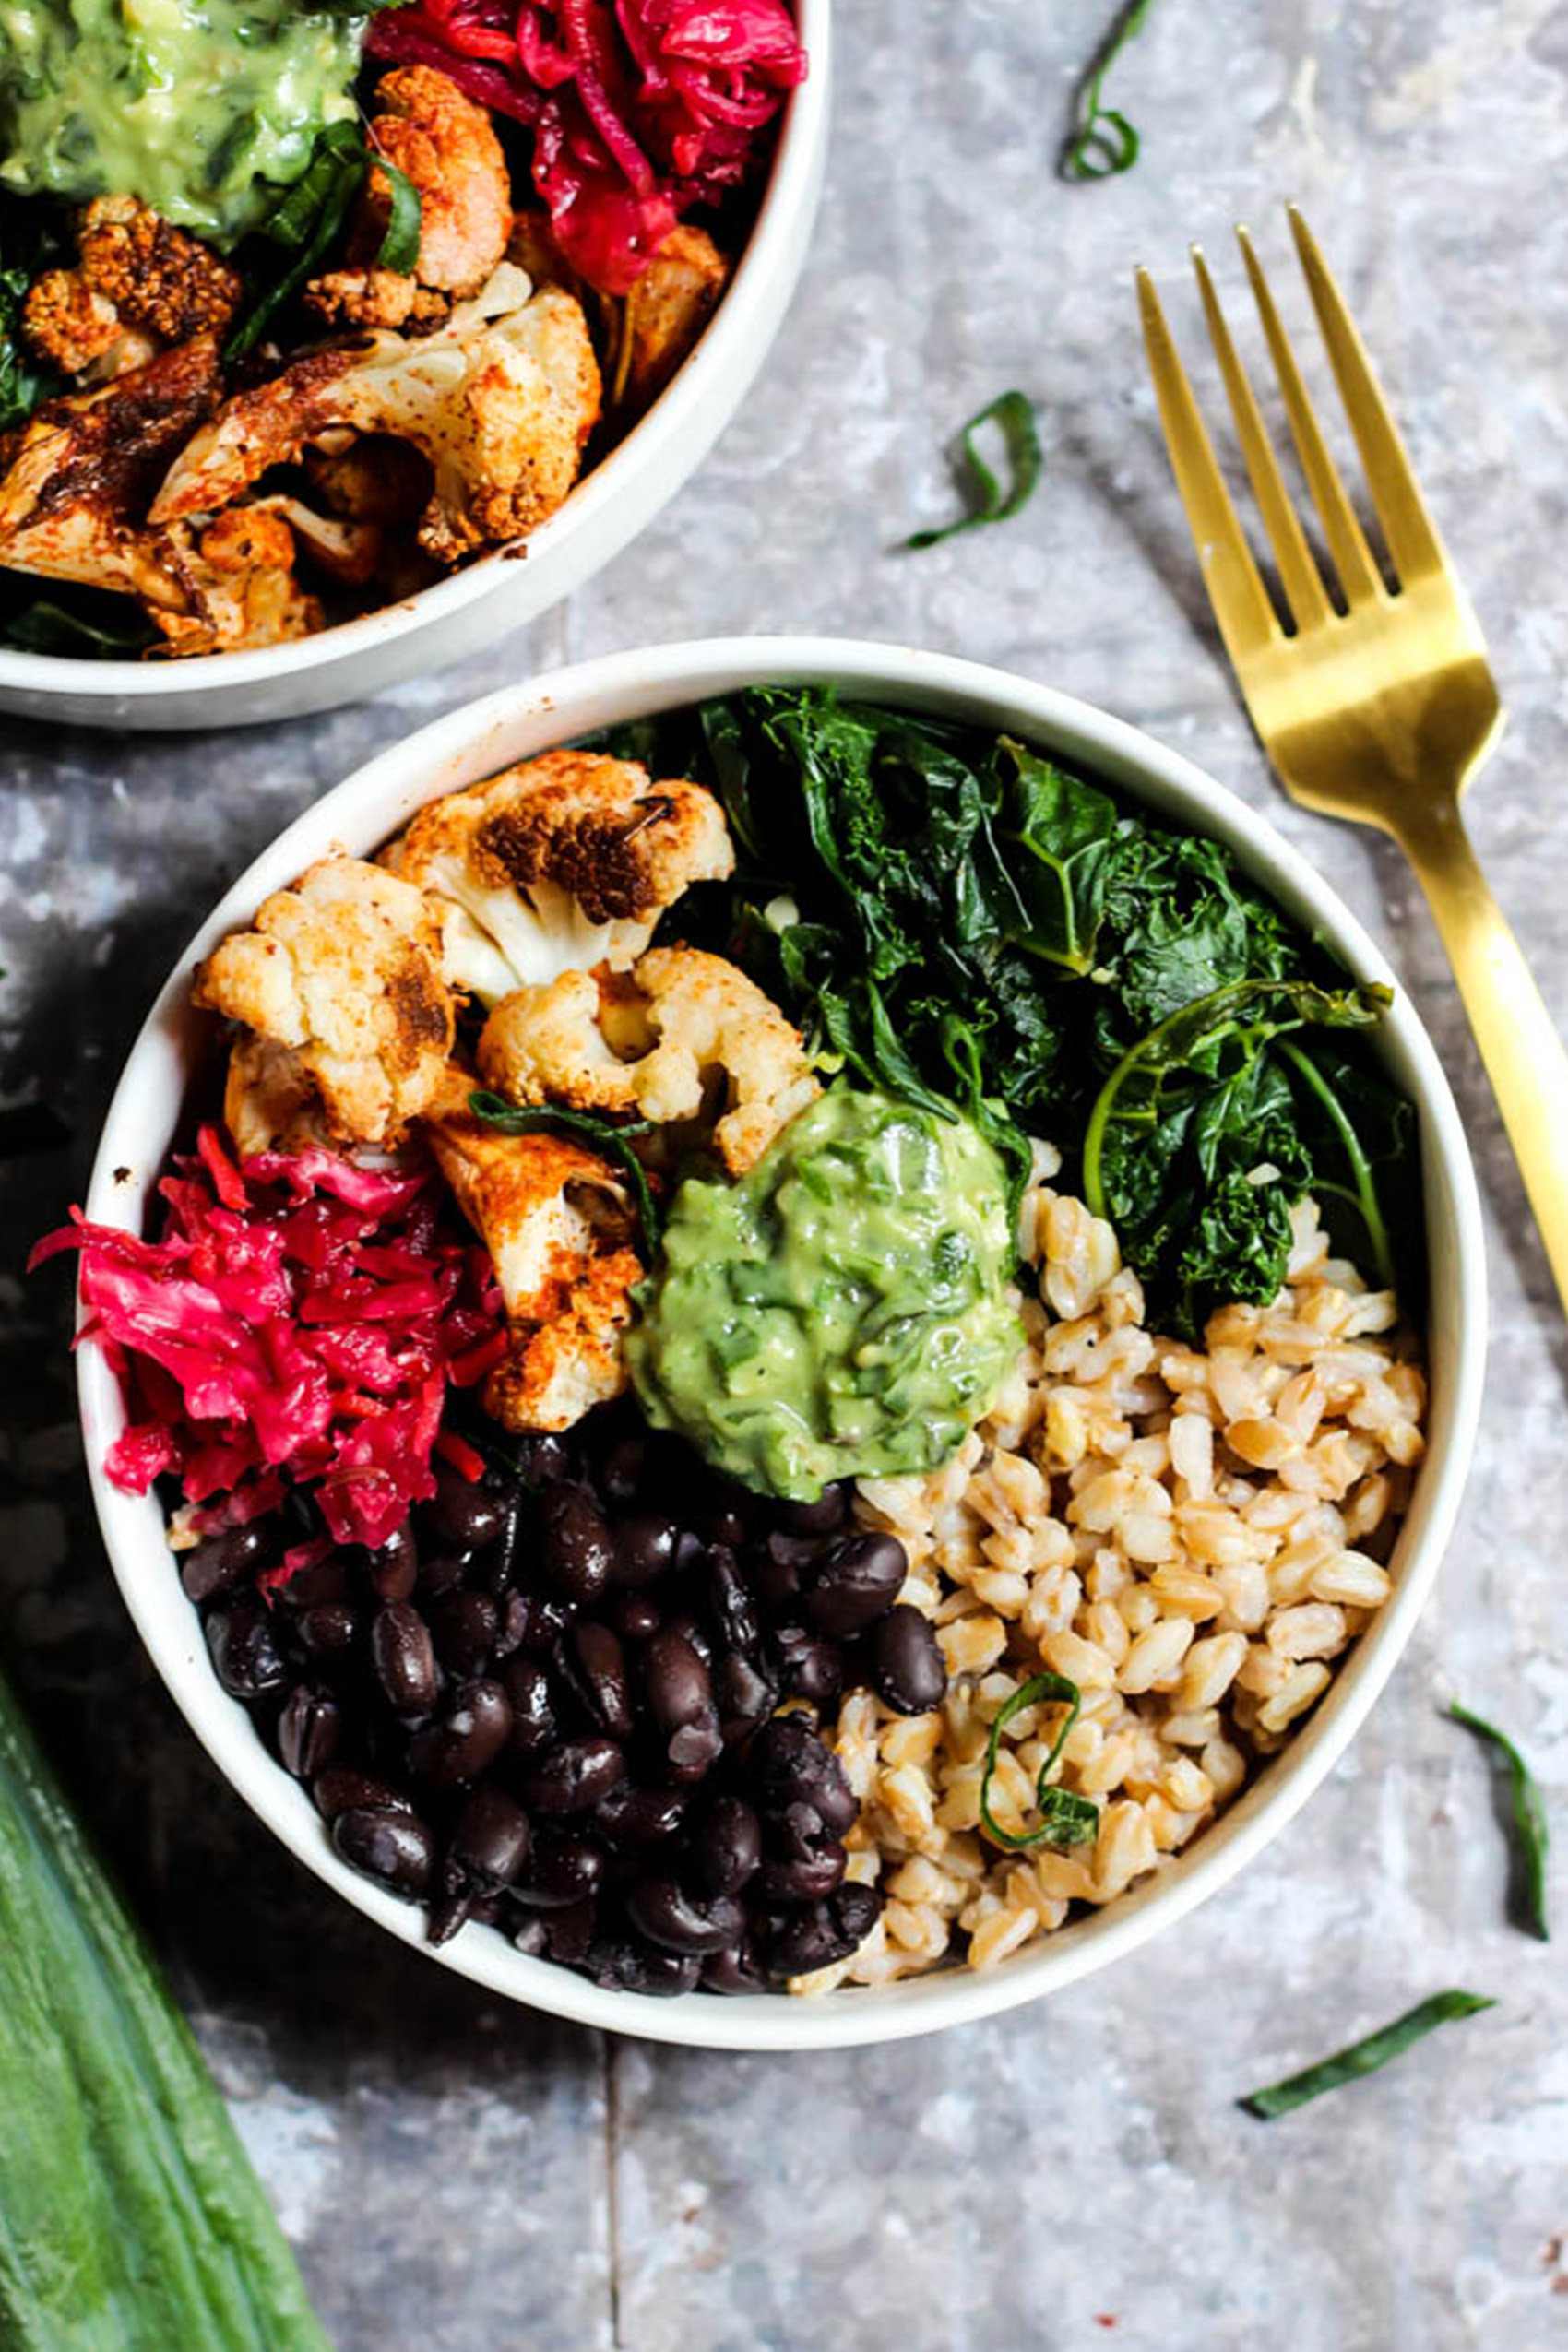 a black bean bowl containing brown rice, cabbage slaw, roasted cauliflower, greens and avocado pesto